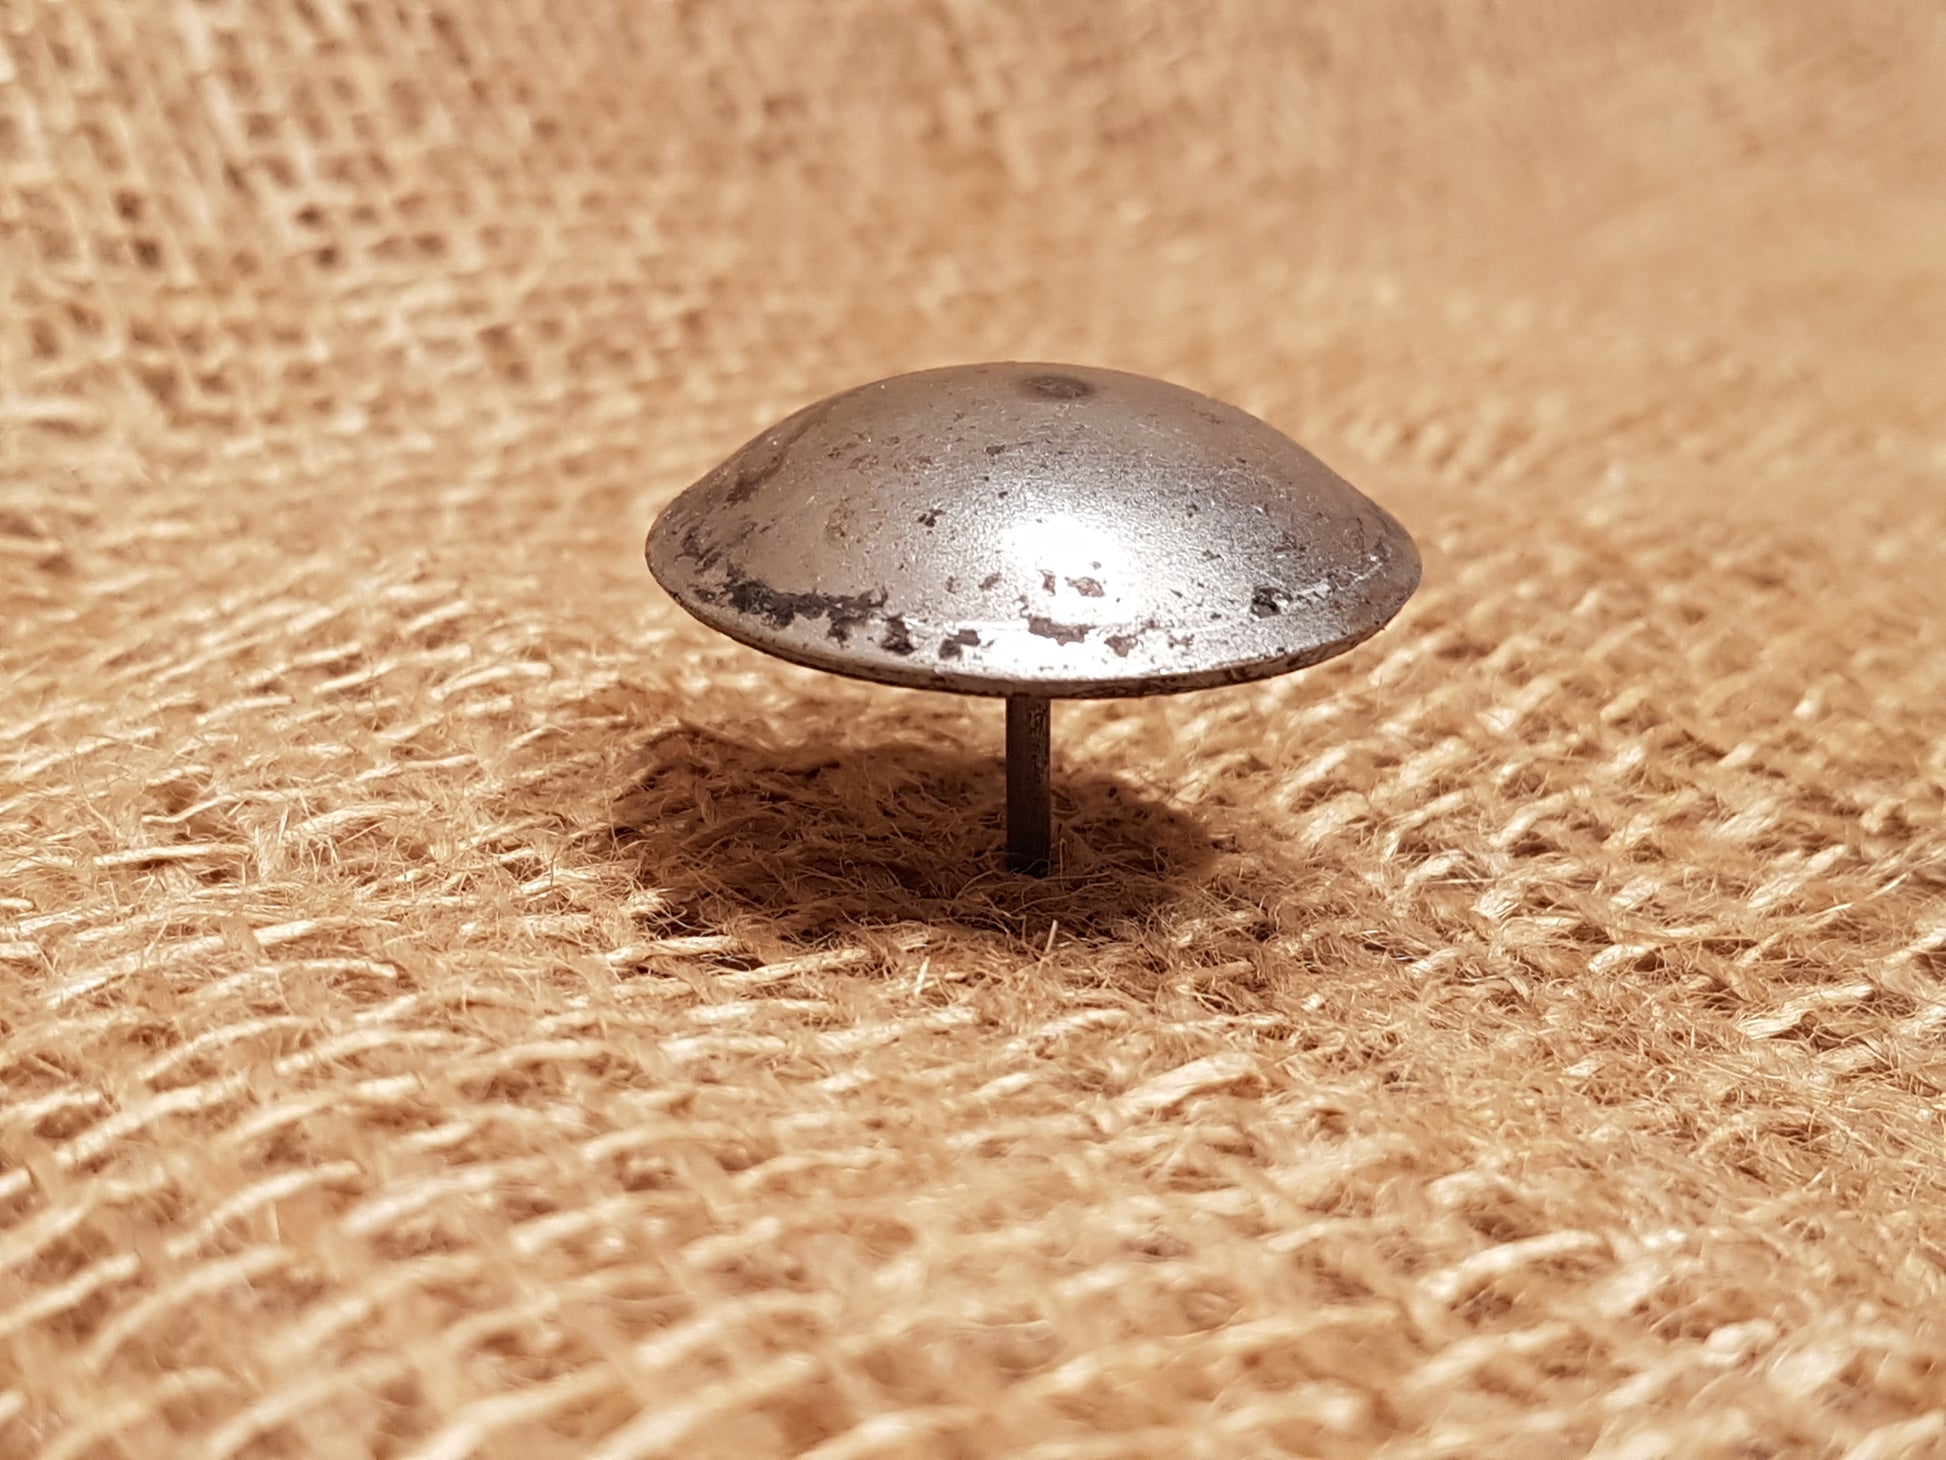 Round Domed Stud - Large 1" - Spearhead Collection - Nails – Spikes – Studs - Hardware, Millwork Hardware, Nails, Studs